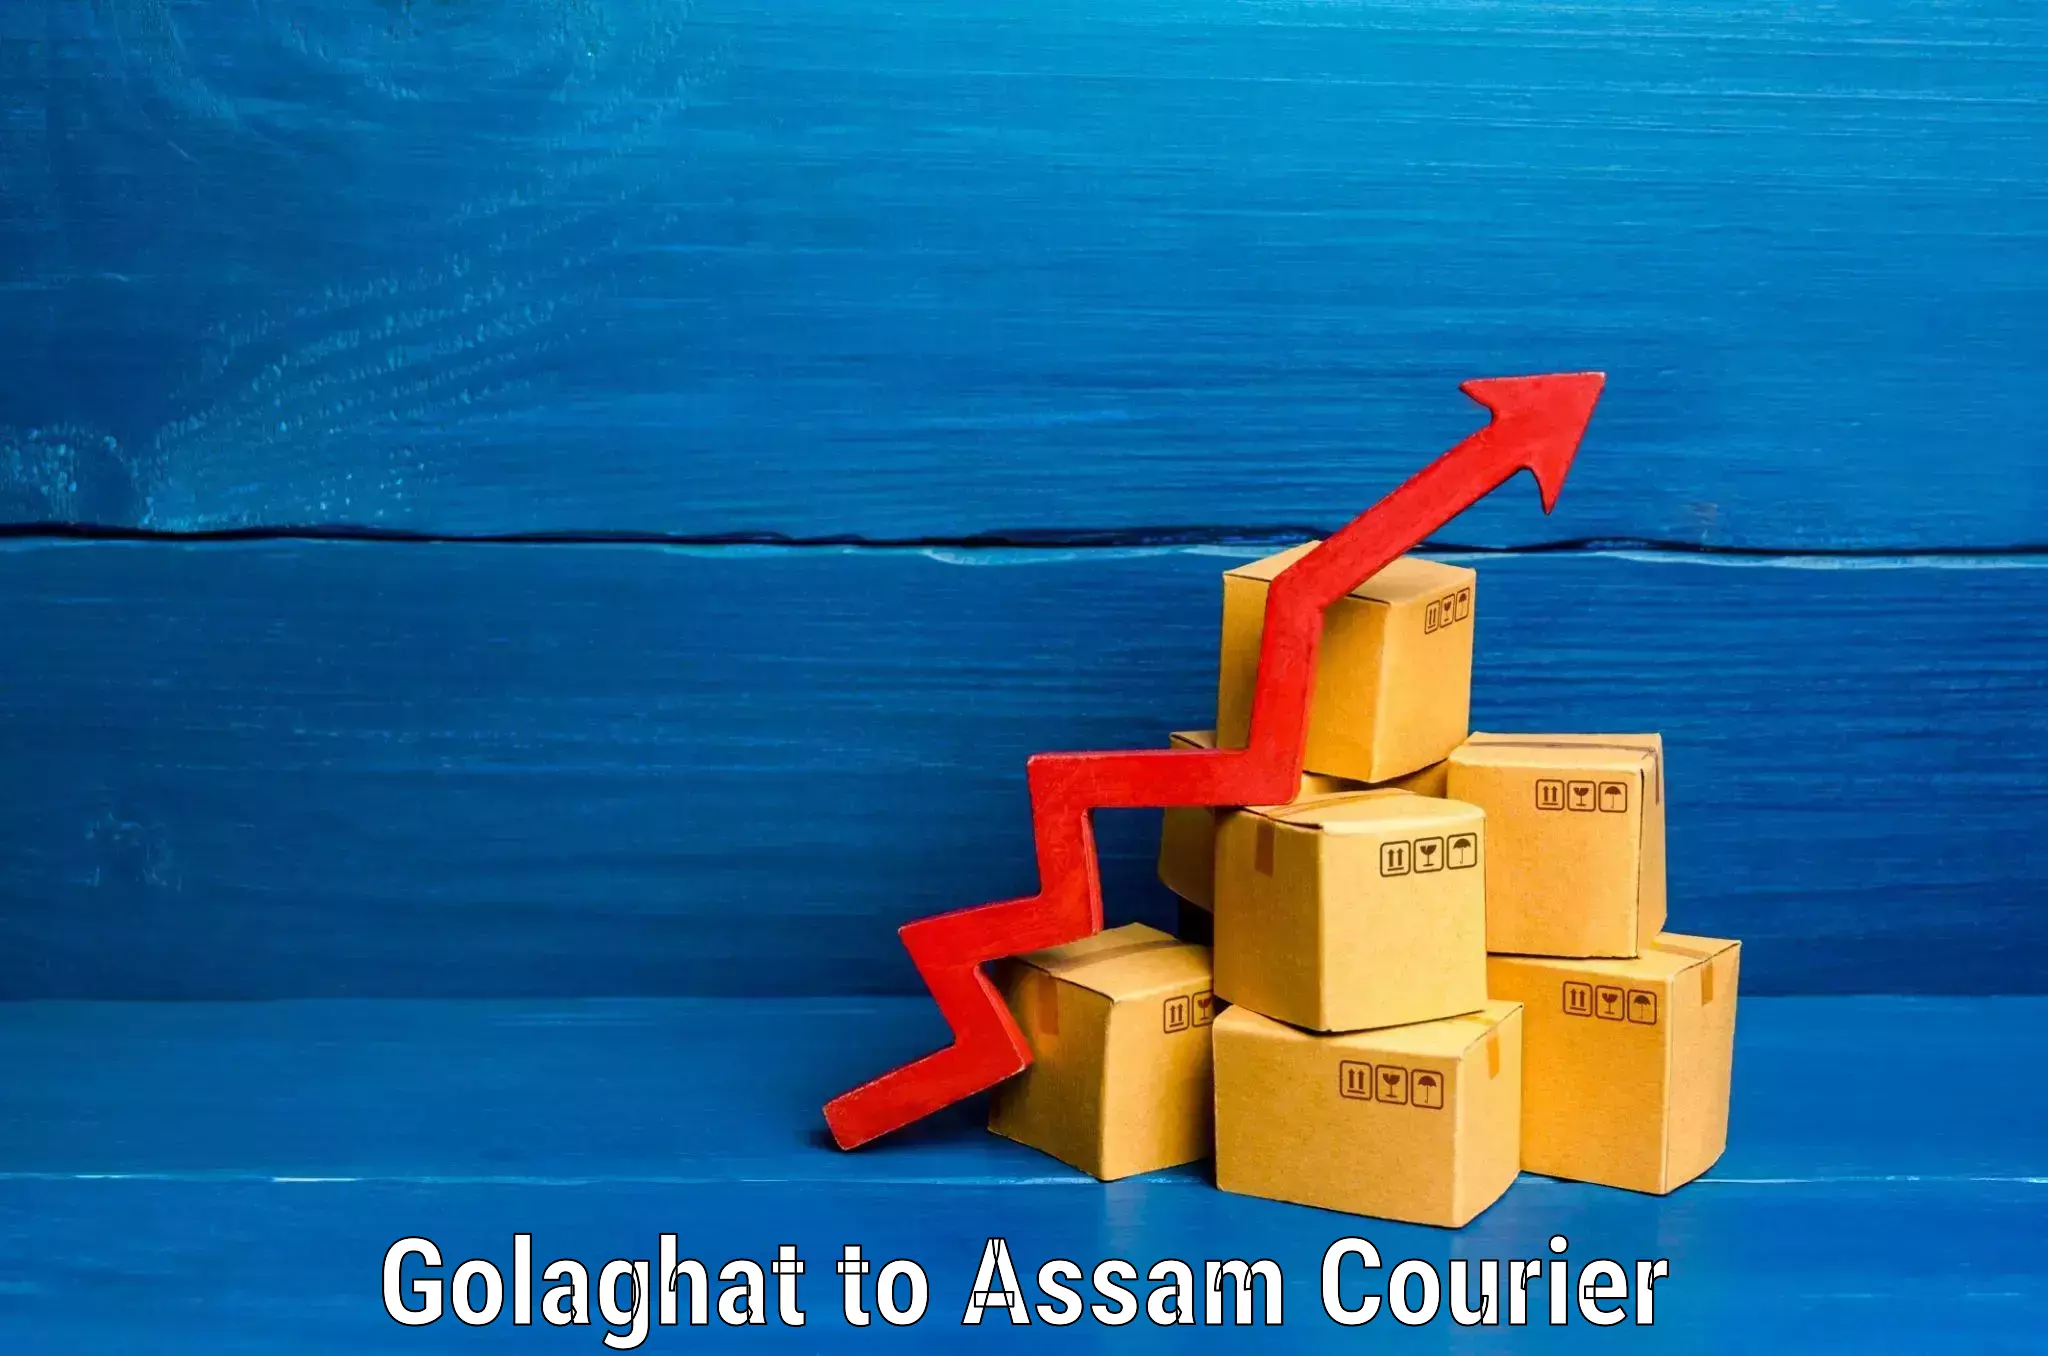 Luggage transport consultancy Golaghat to Assam